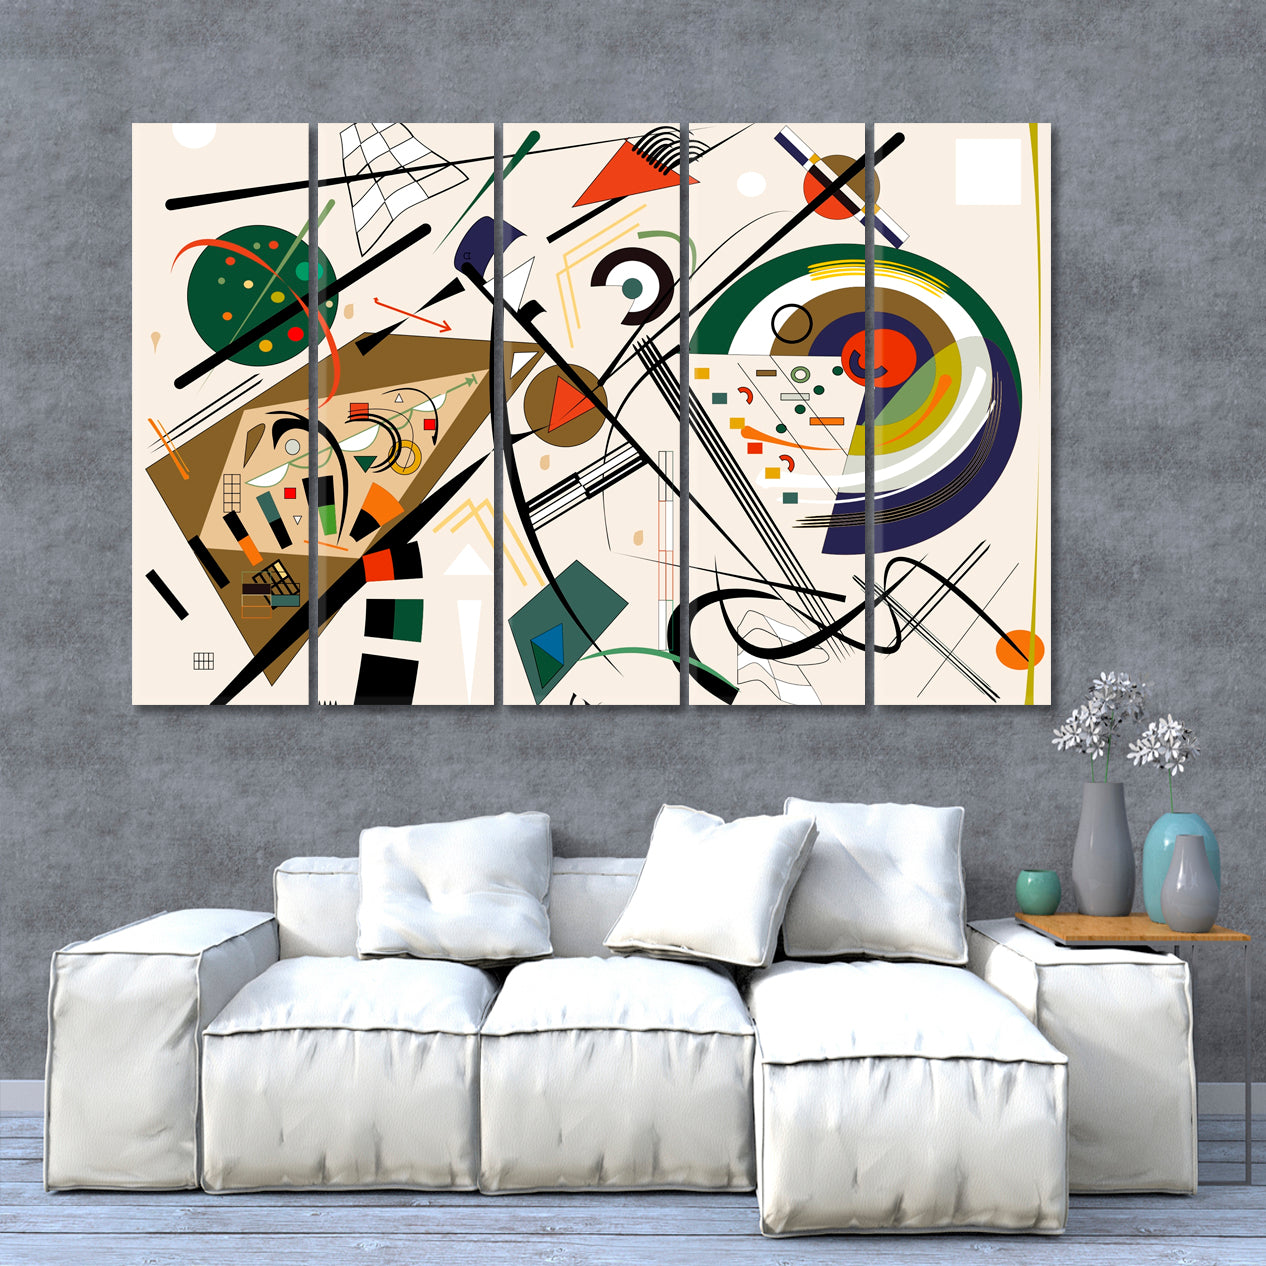 KANDINSKY STYLE Abstract Fancy Geometric Forms Curved Shapes Abstract Art Print Artesty 5 panels 36" x 24" 